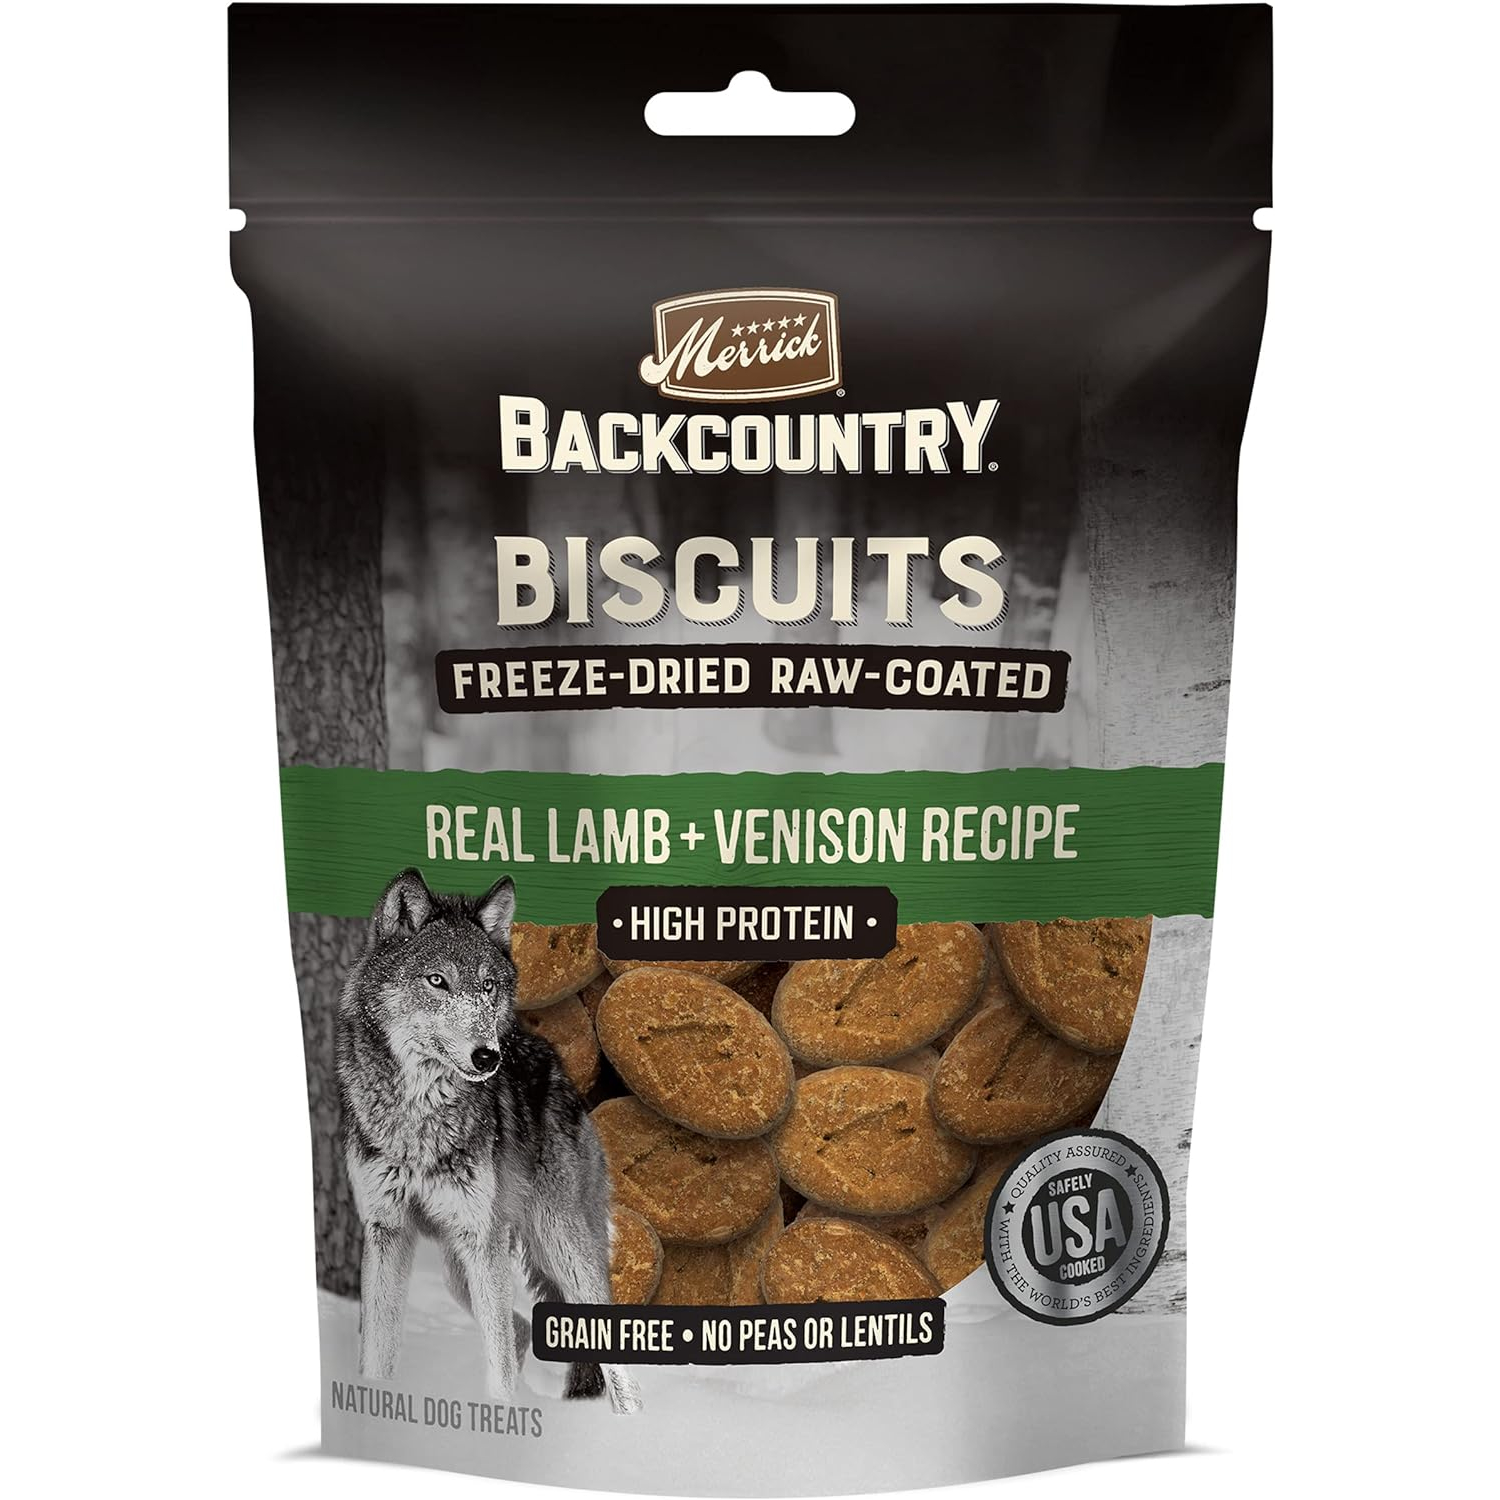 Merrick Backcountry Biscuits Real Lamb + Venison Recipe